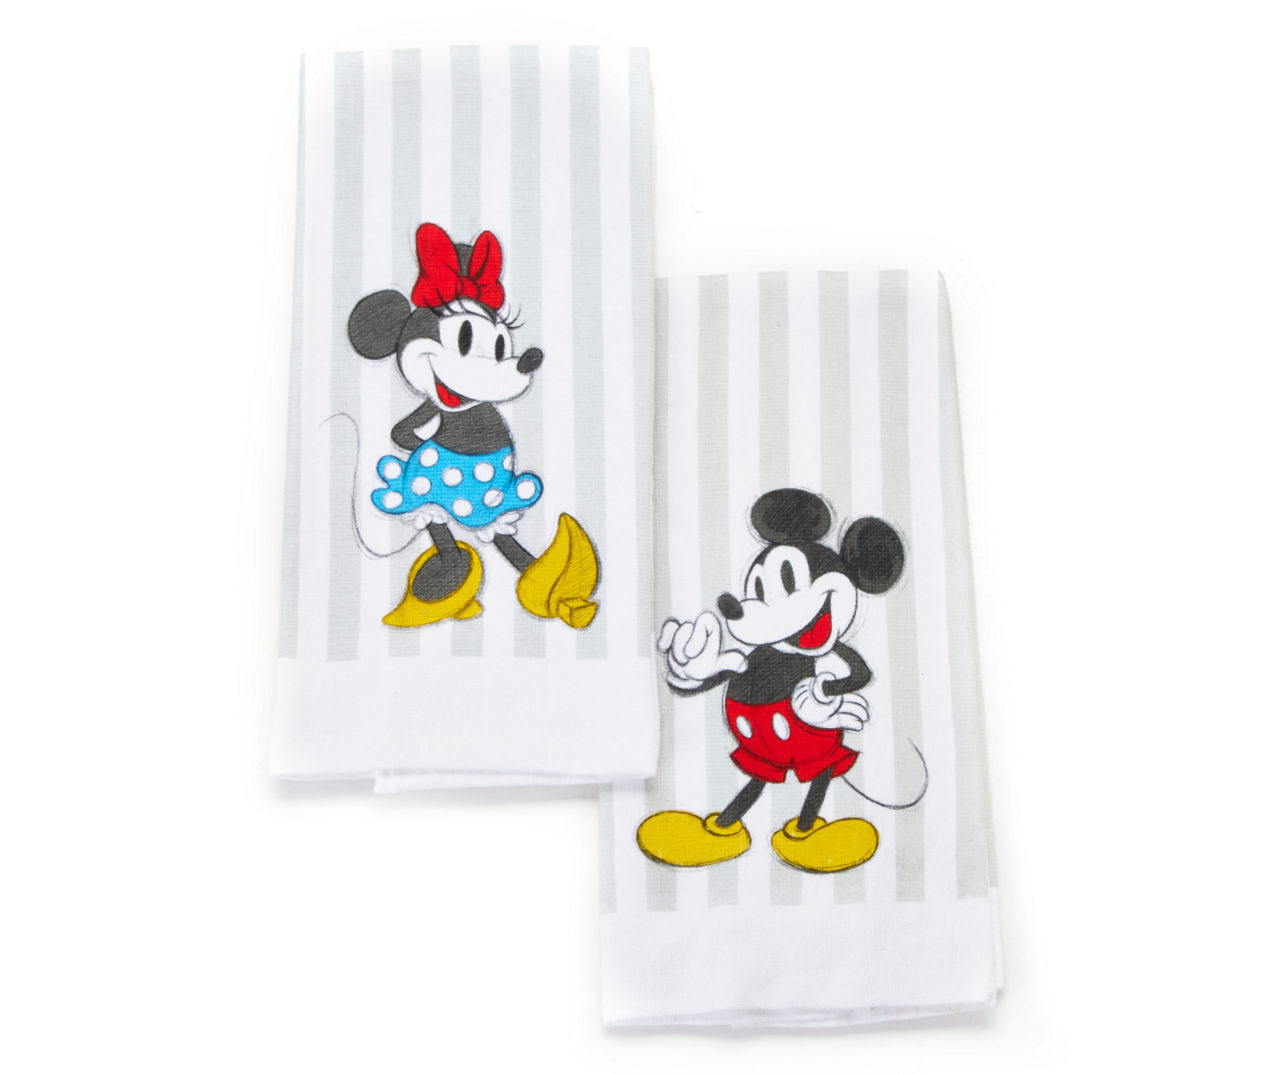 NEW Disney Mickey and Minnie Mouse 16in x 26in 2pc Kitchen Dish Towel Set